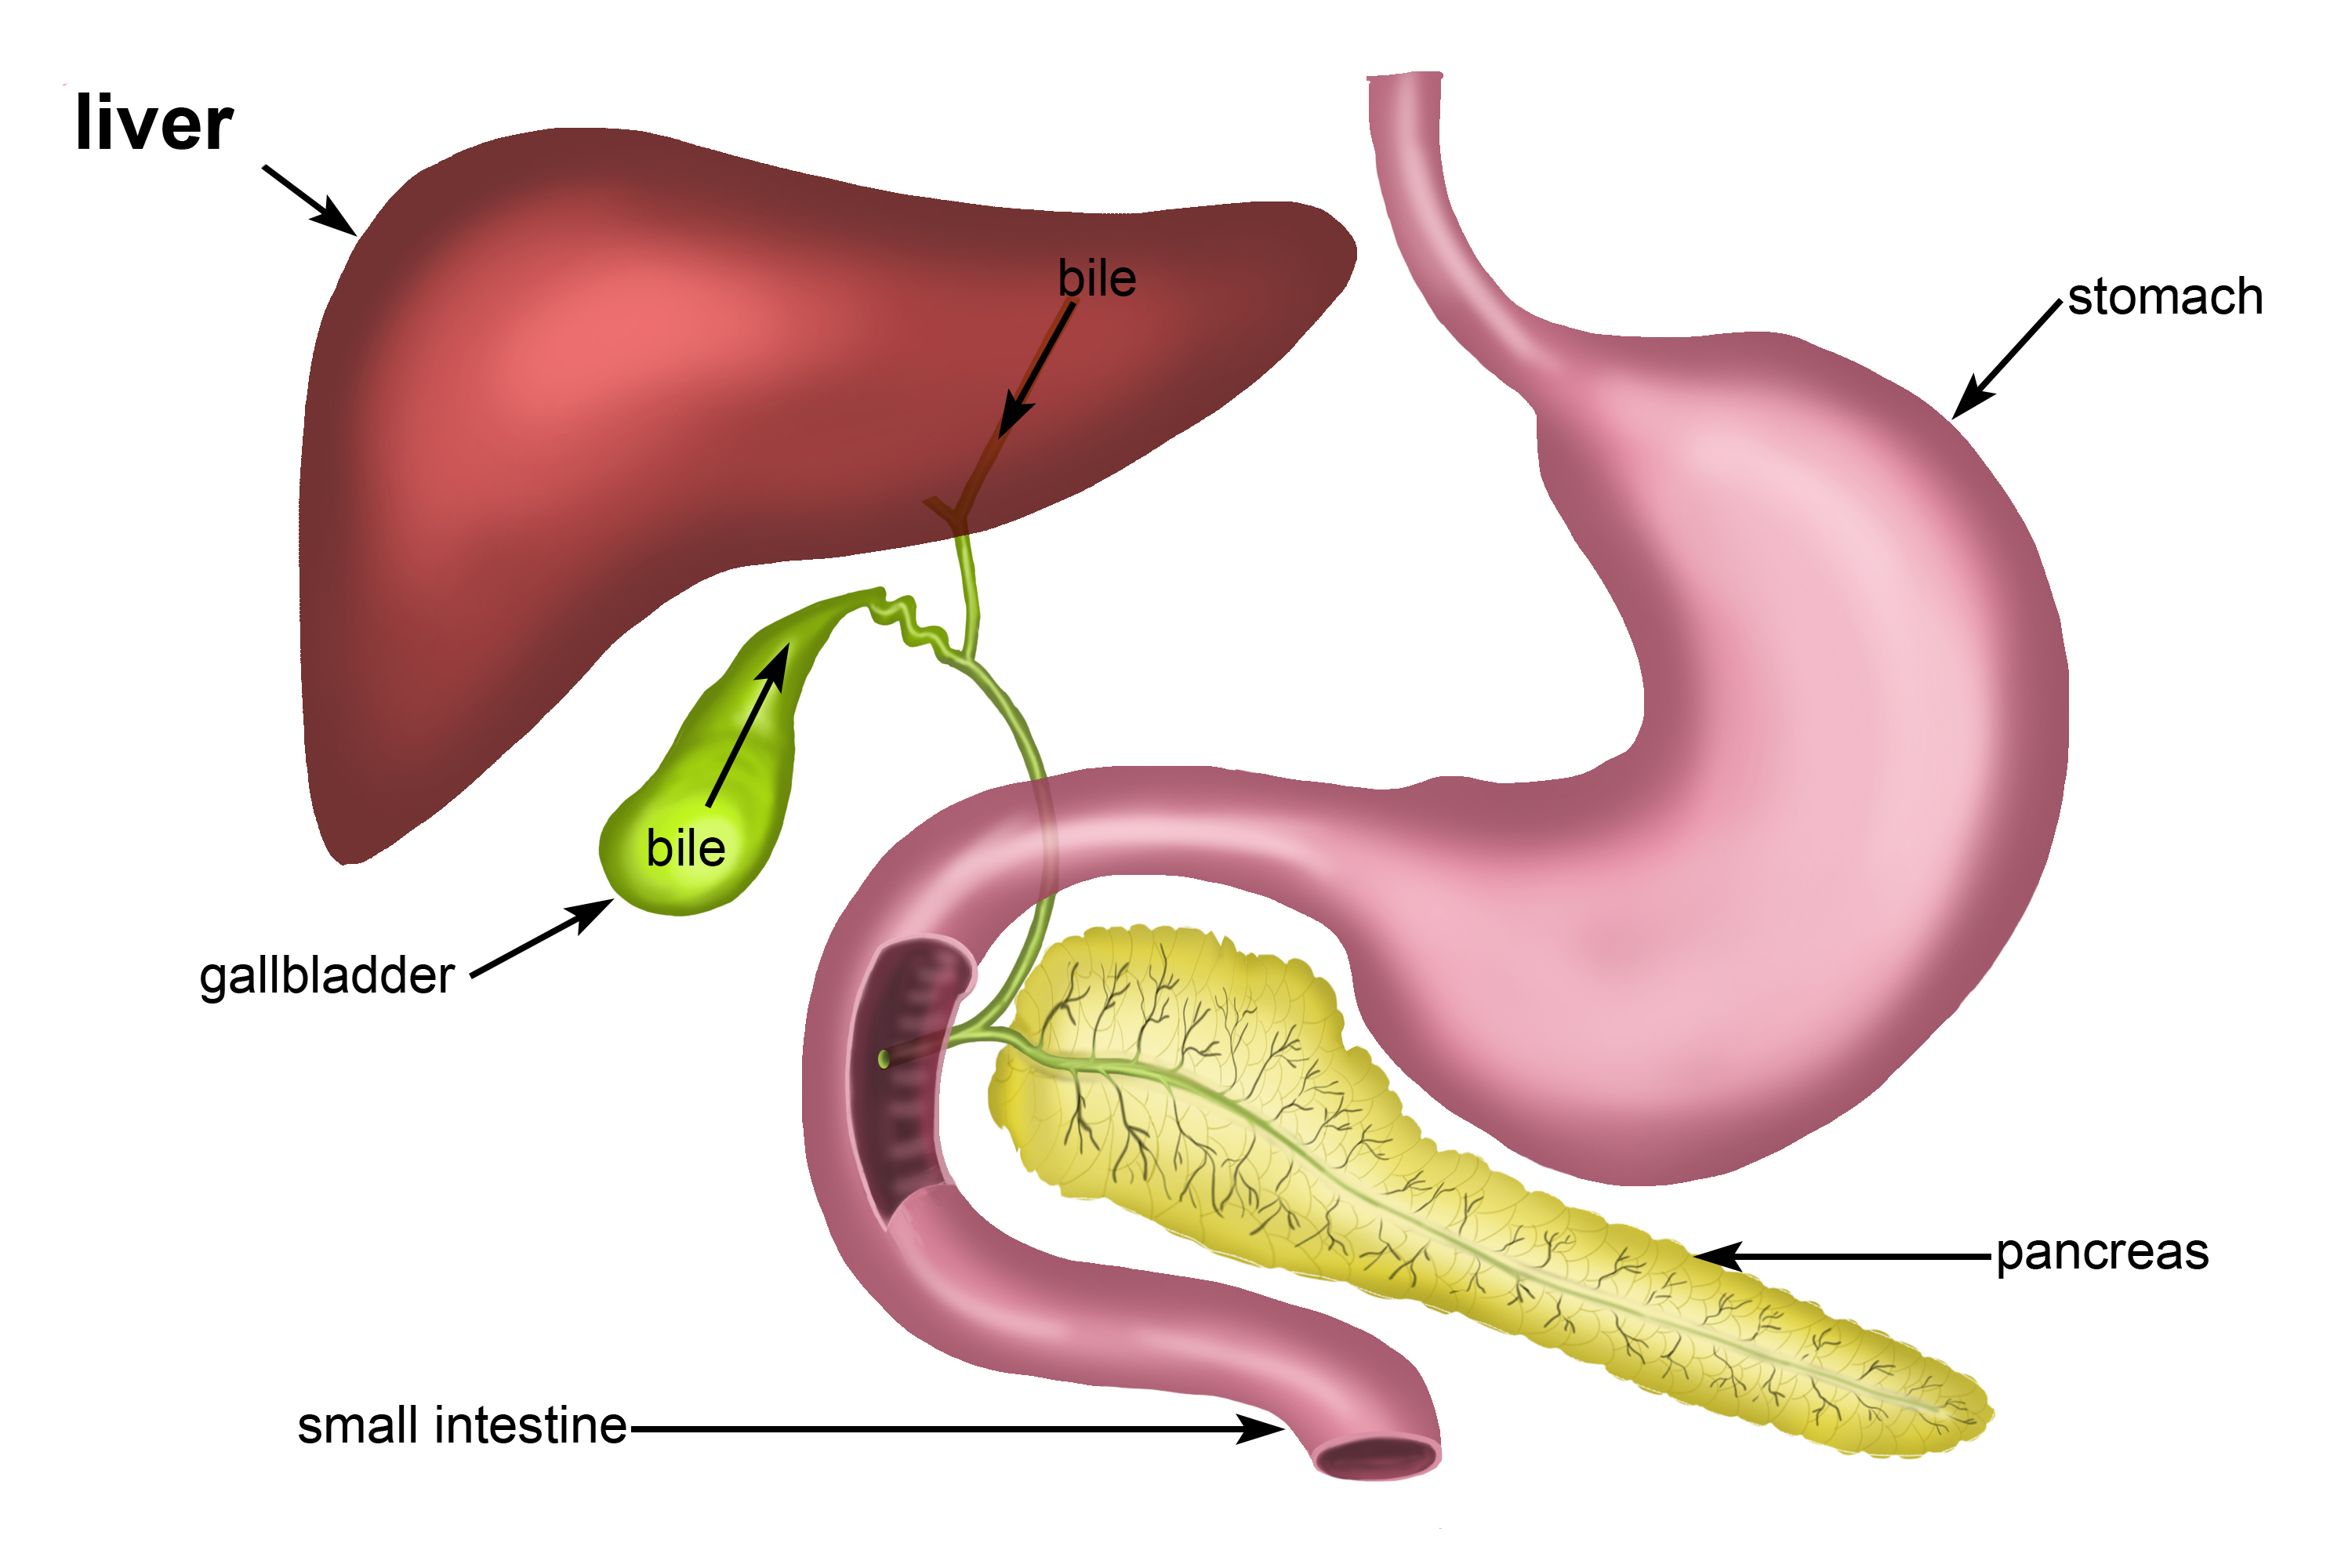 Bile tract image from the liver to the small intestine